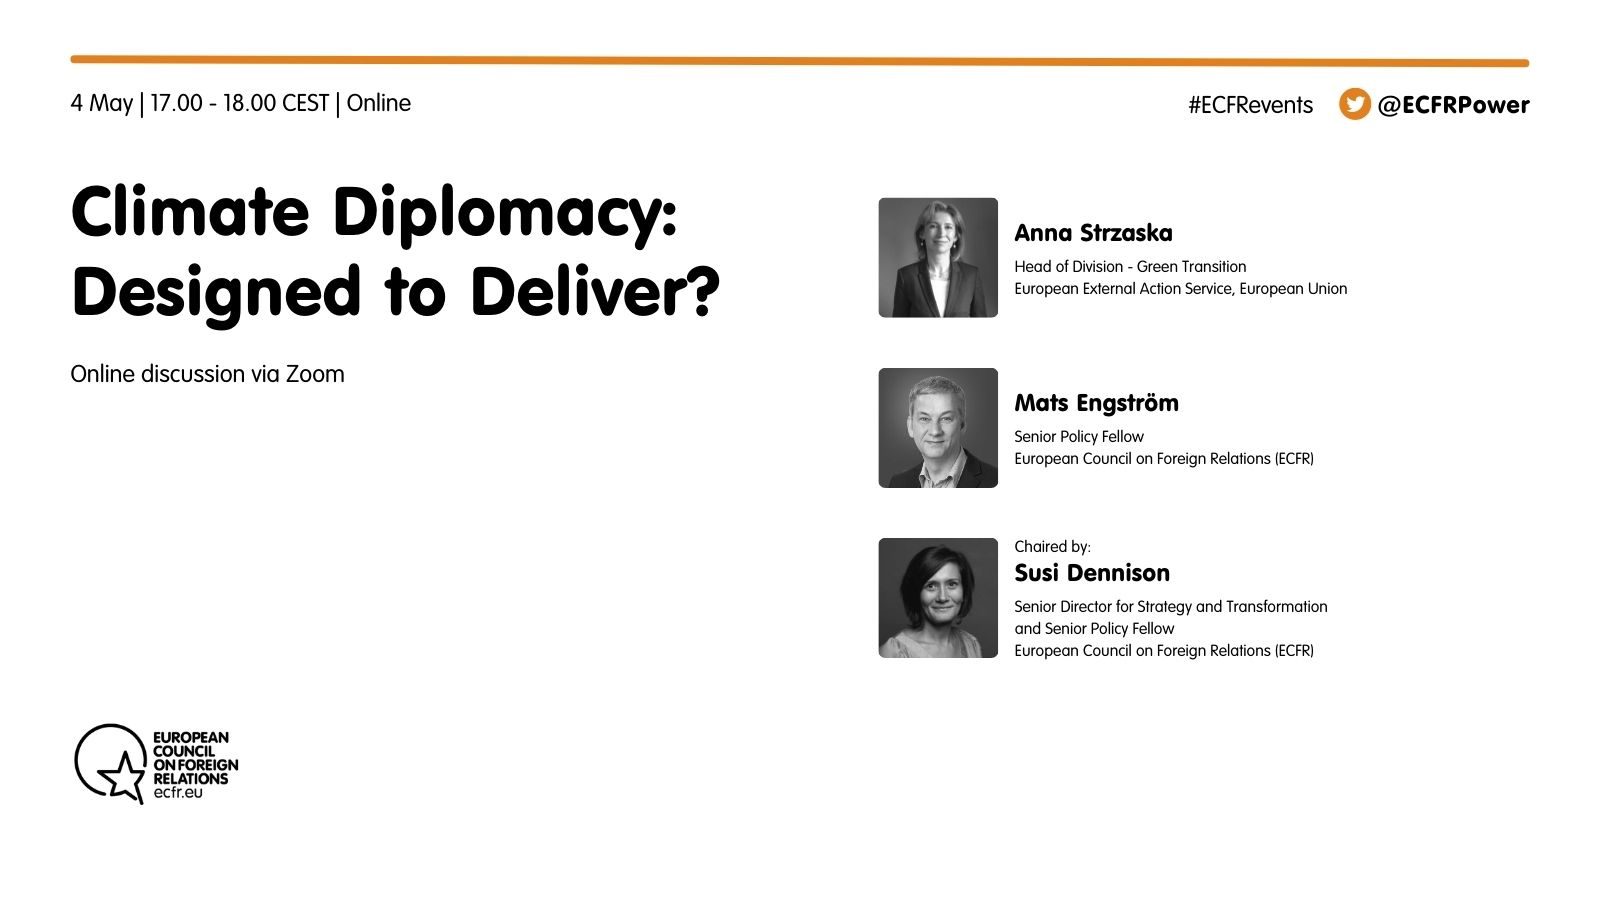 Climate Diplomacy: Designed to Deliver?